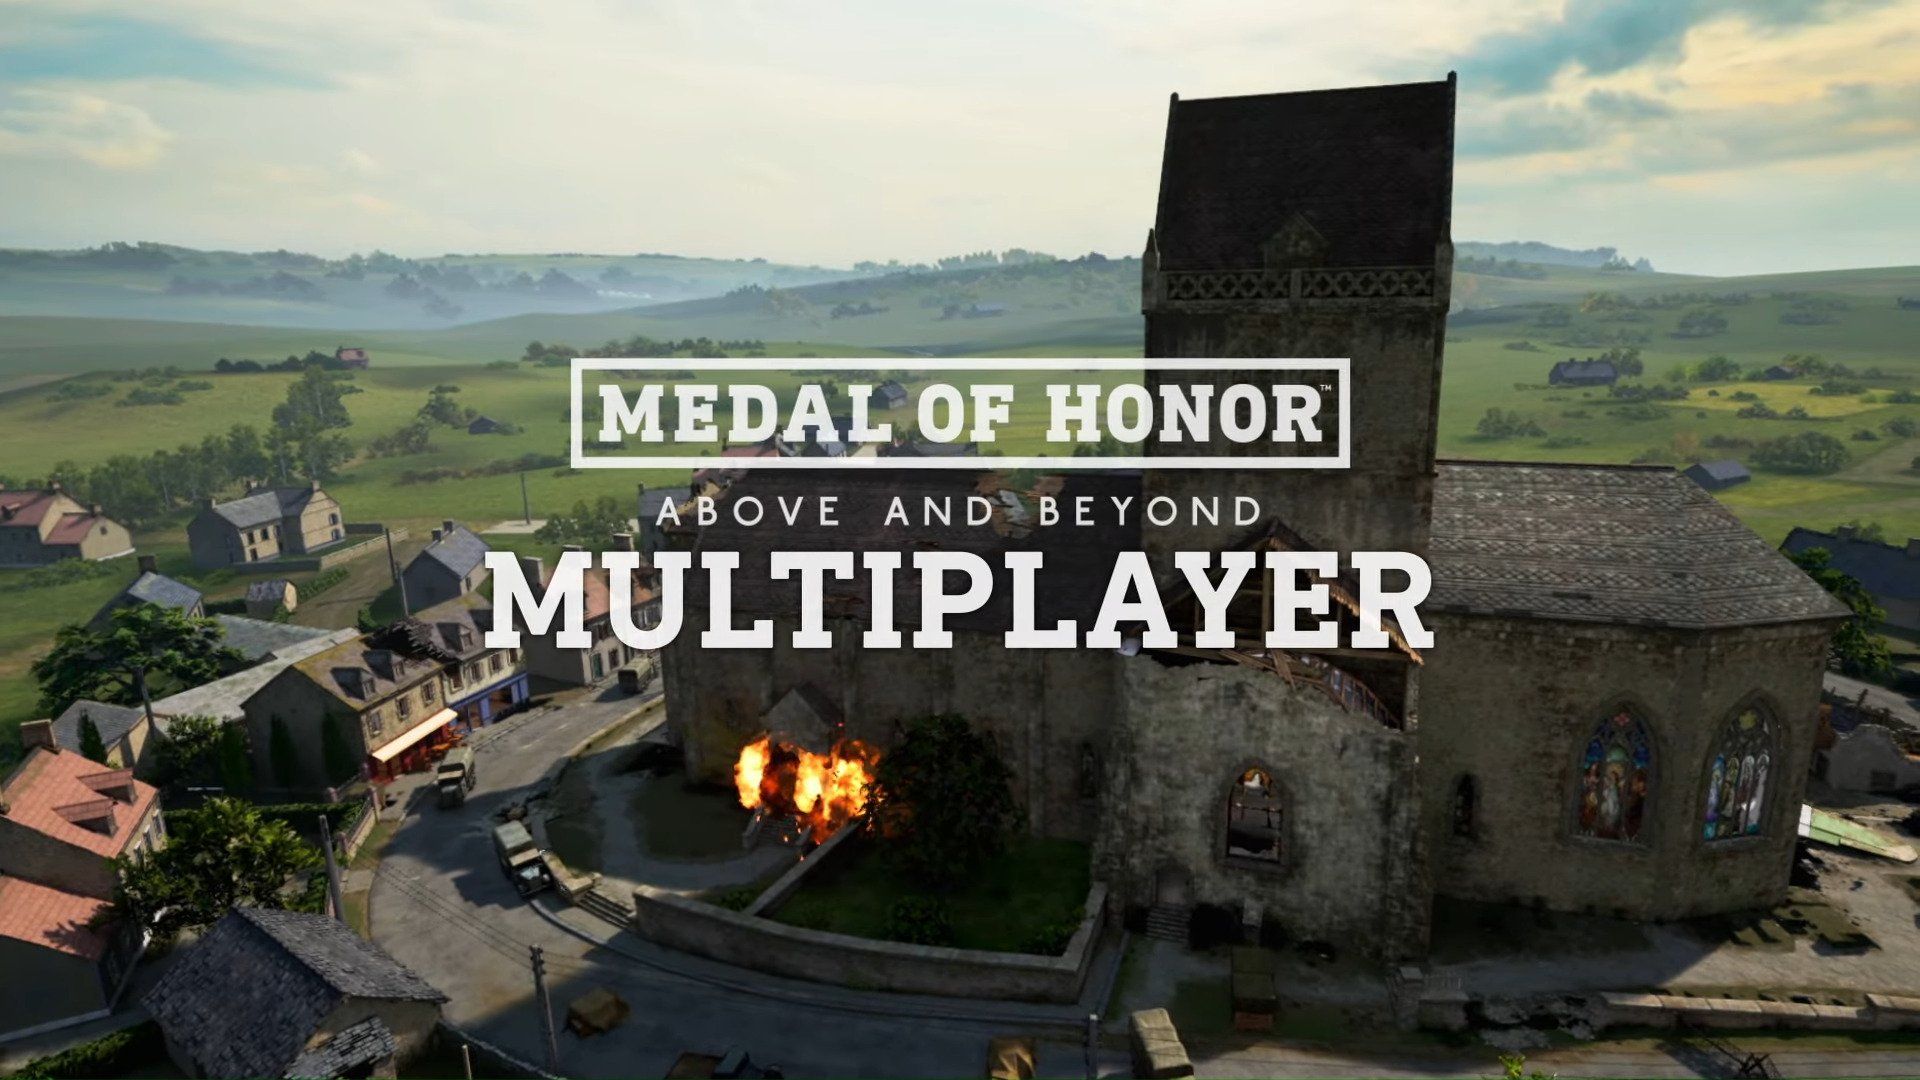 Medal of Honor: Above And Beyond VR Multiplayer Looks Incredible, A Big Step Up For VR Shooters